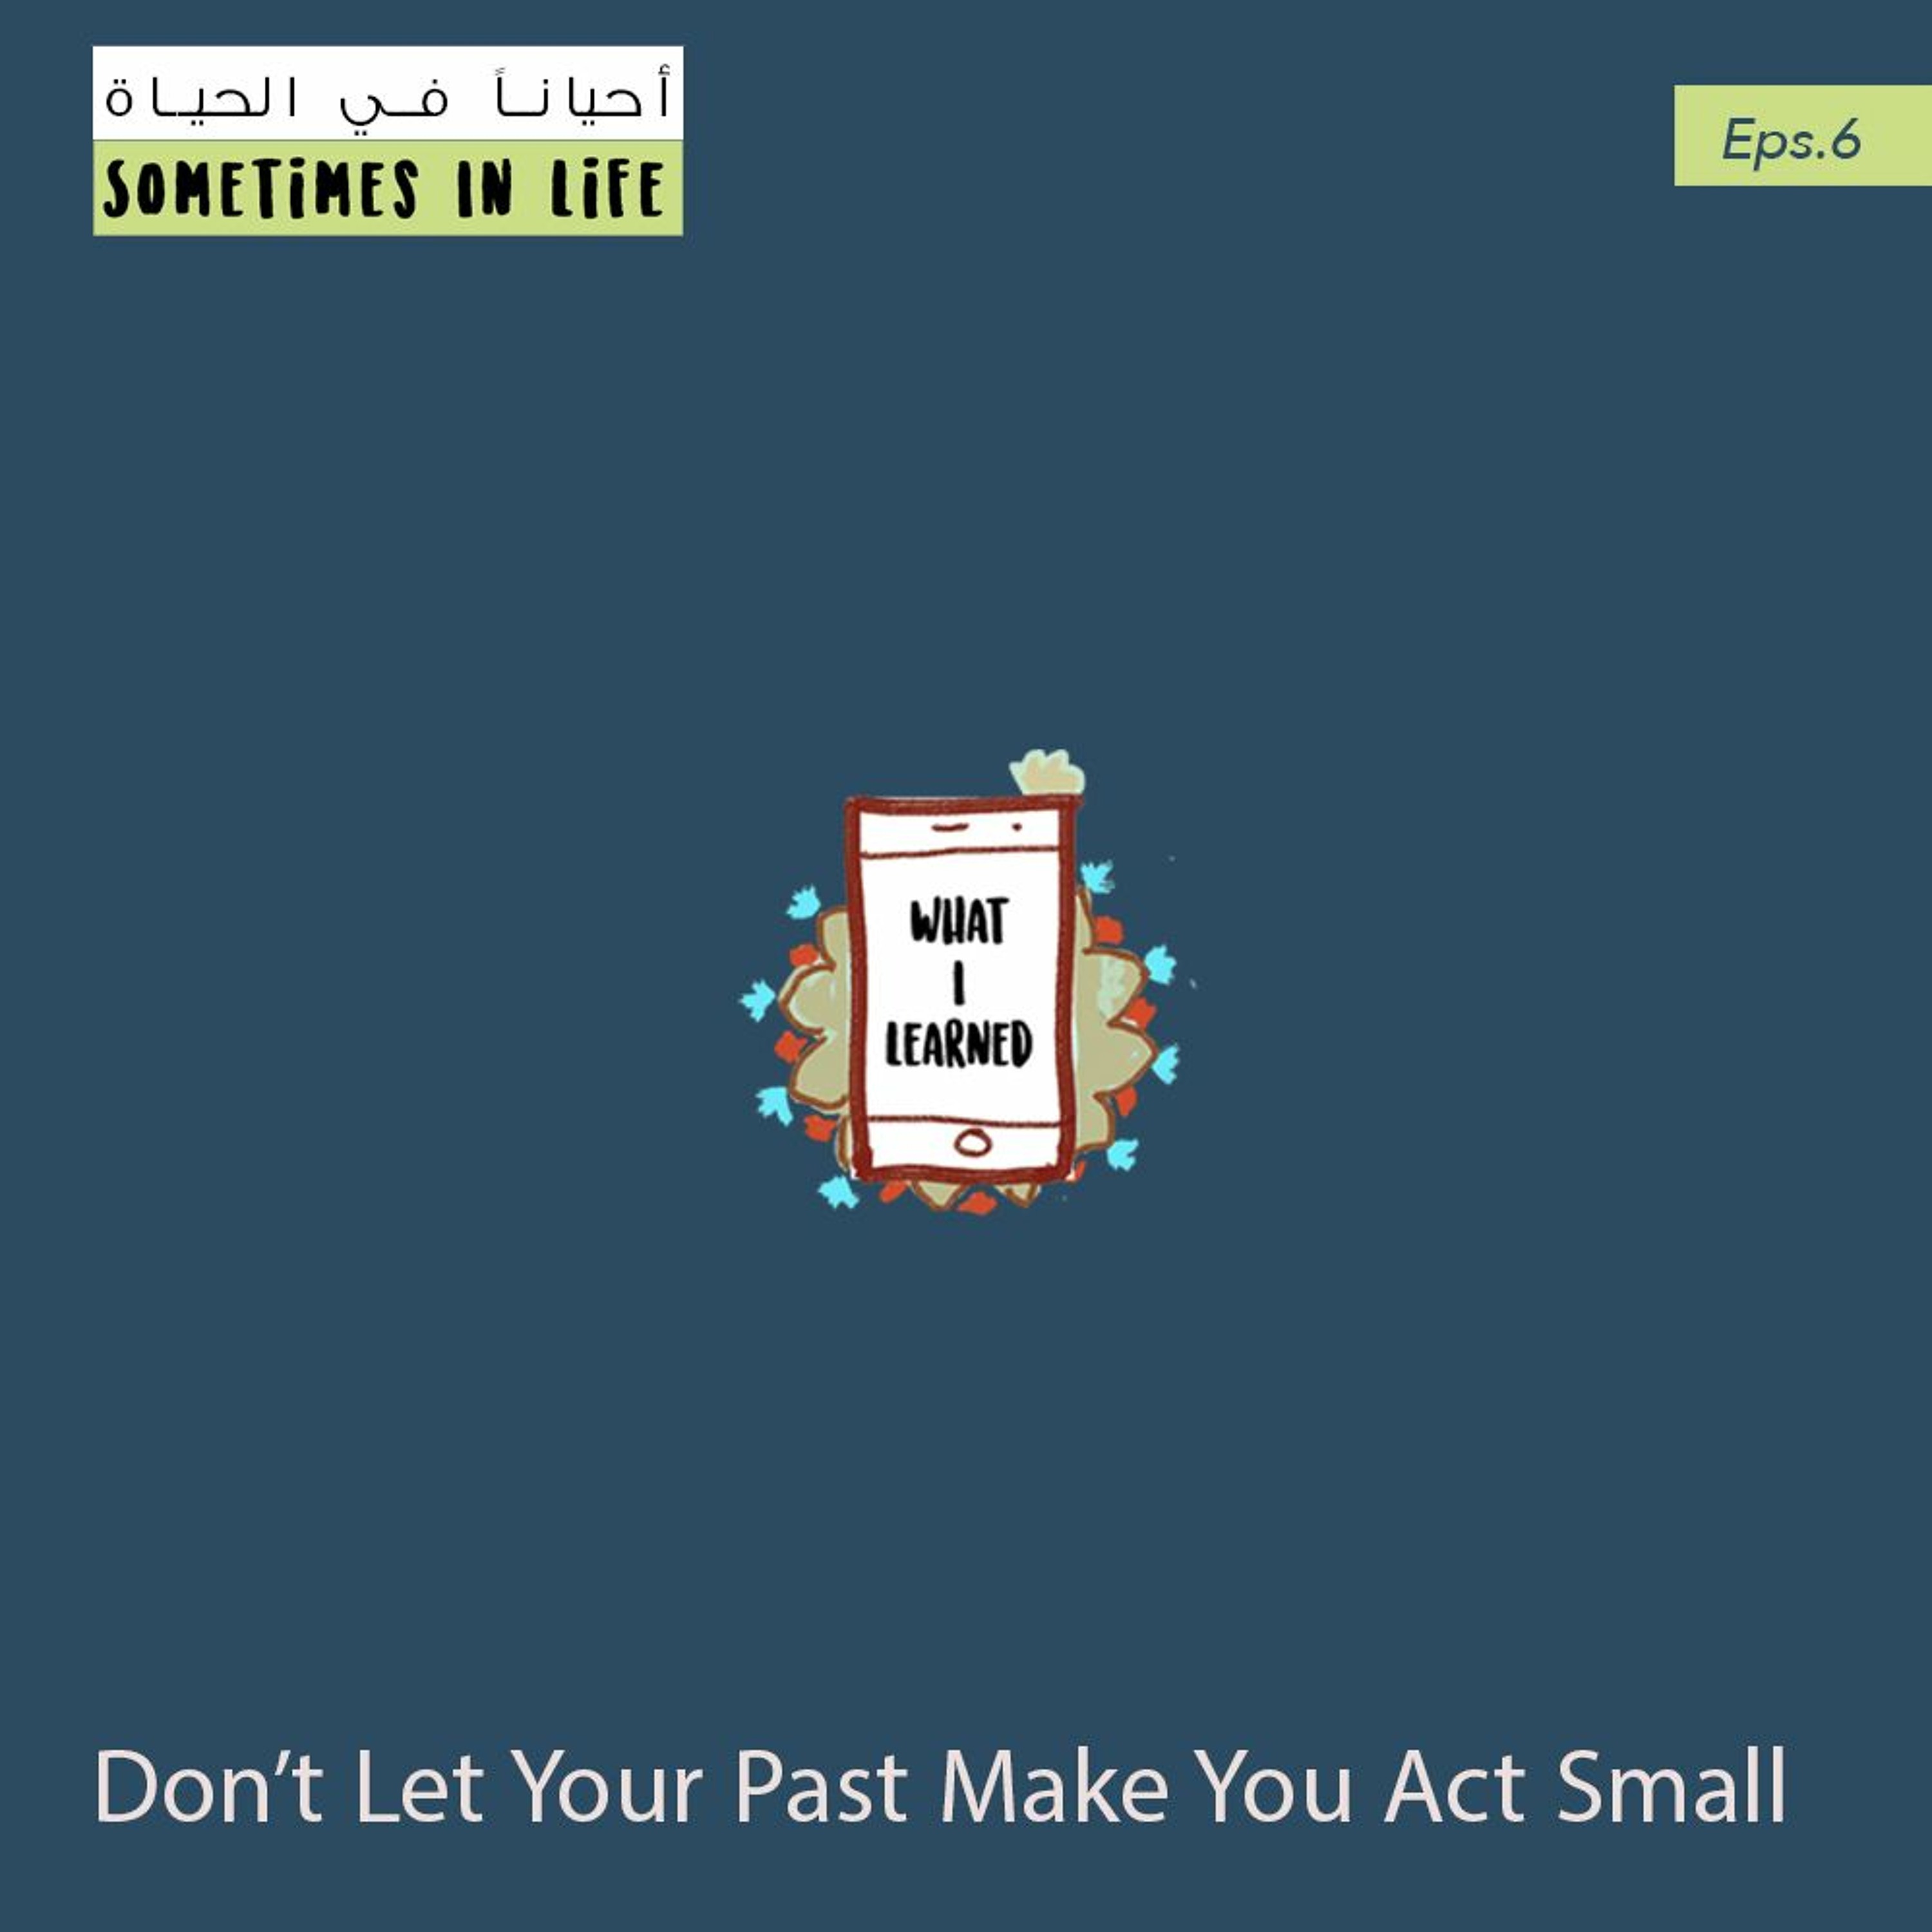 6: Don’t Let Your Past Make You Act Small